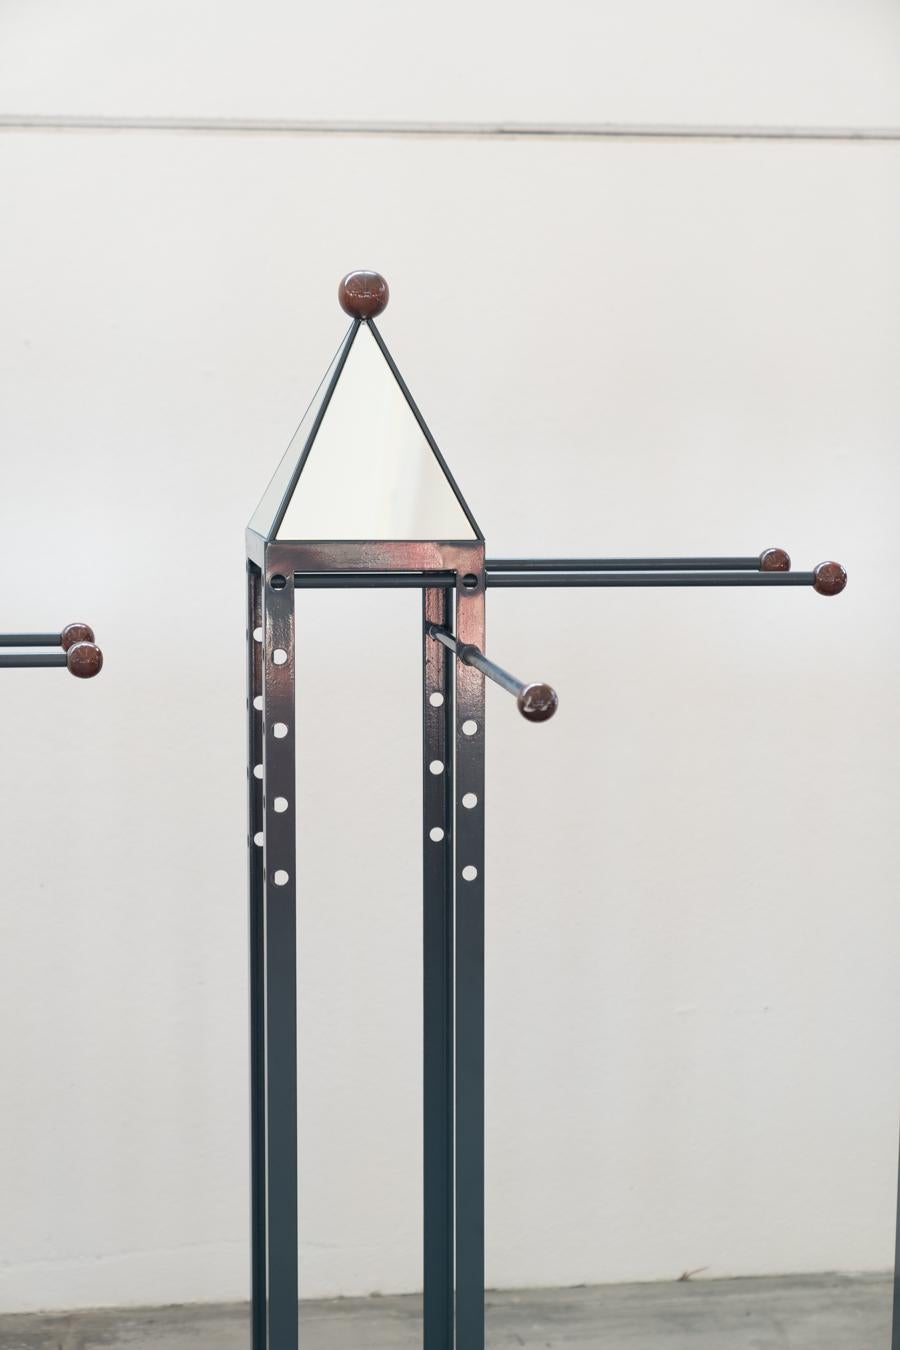 Wood and brass coat rack, set of 4, 1970s
Cherry wood base, iron columns painted mouse gray and 	brass ball feet. Top pyramid with mirror. Each with 4 arms 	iron movable and adjustable in the 5 holes present at different heights on the columns.